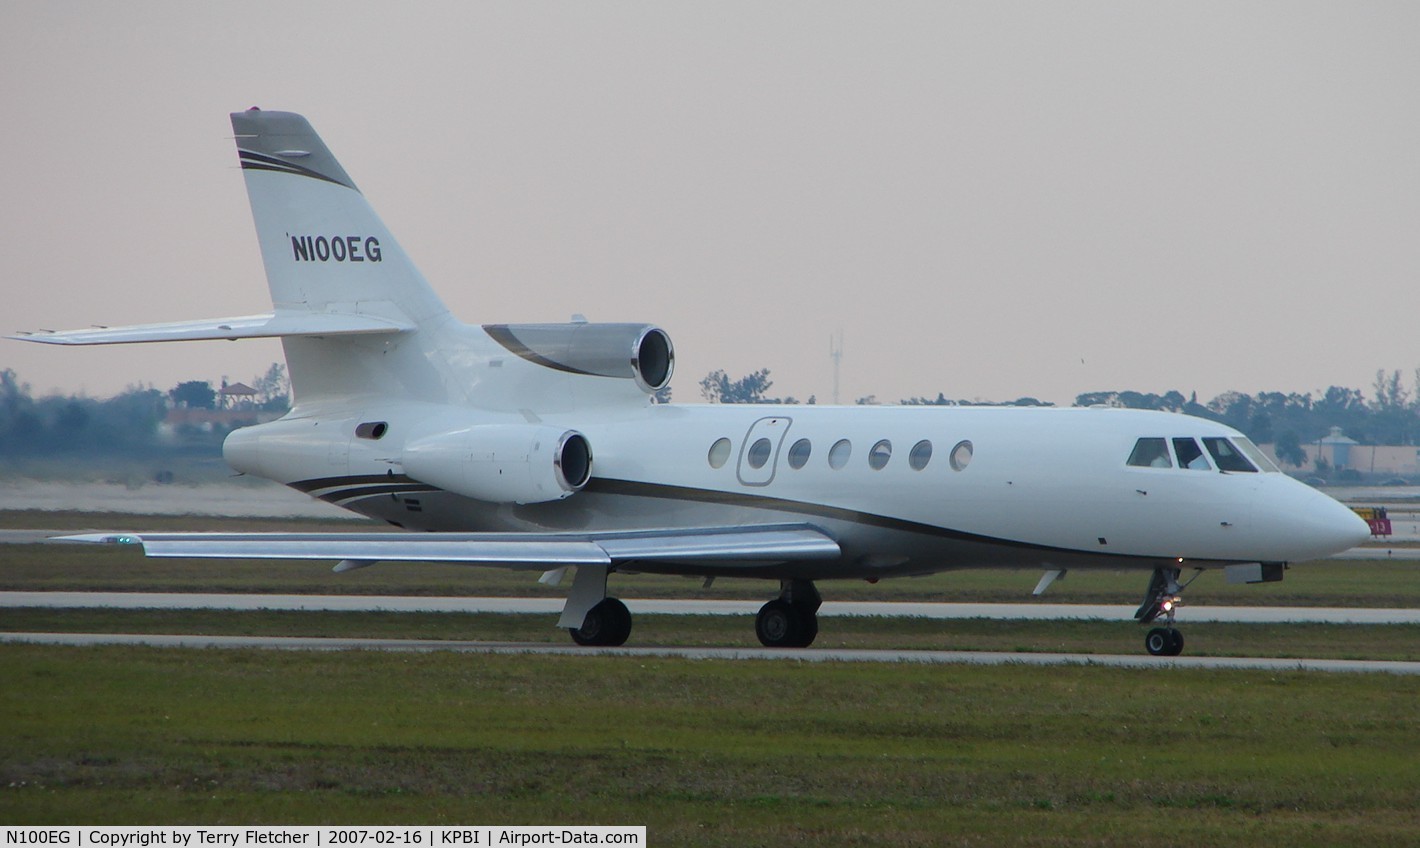 N100EG, 1982 Dassault Falcon 50 C/N 105, part of the Friday afternoon arrivals 'rush' at PBI